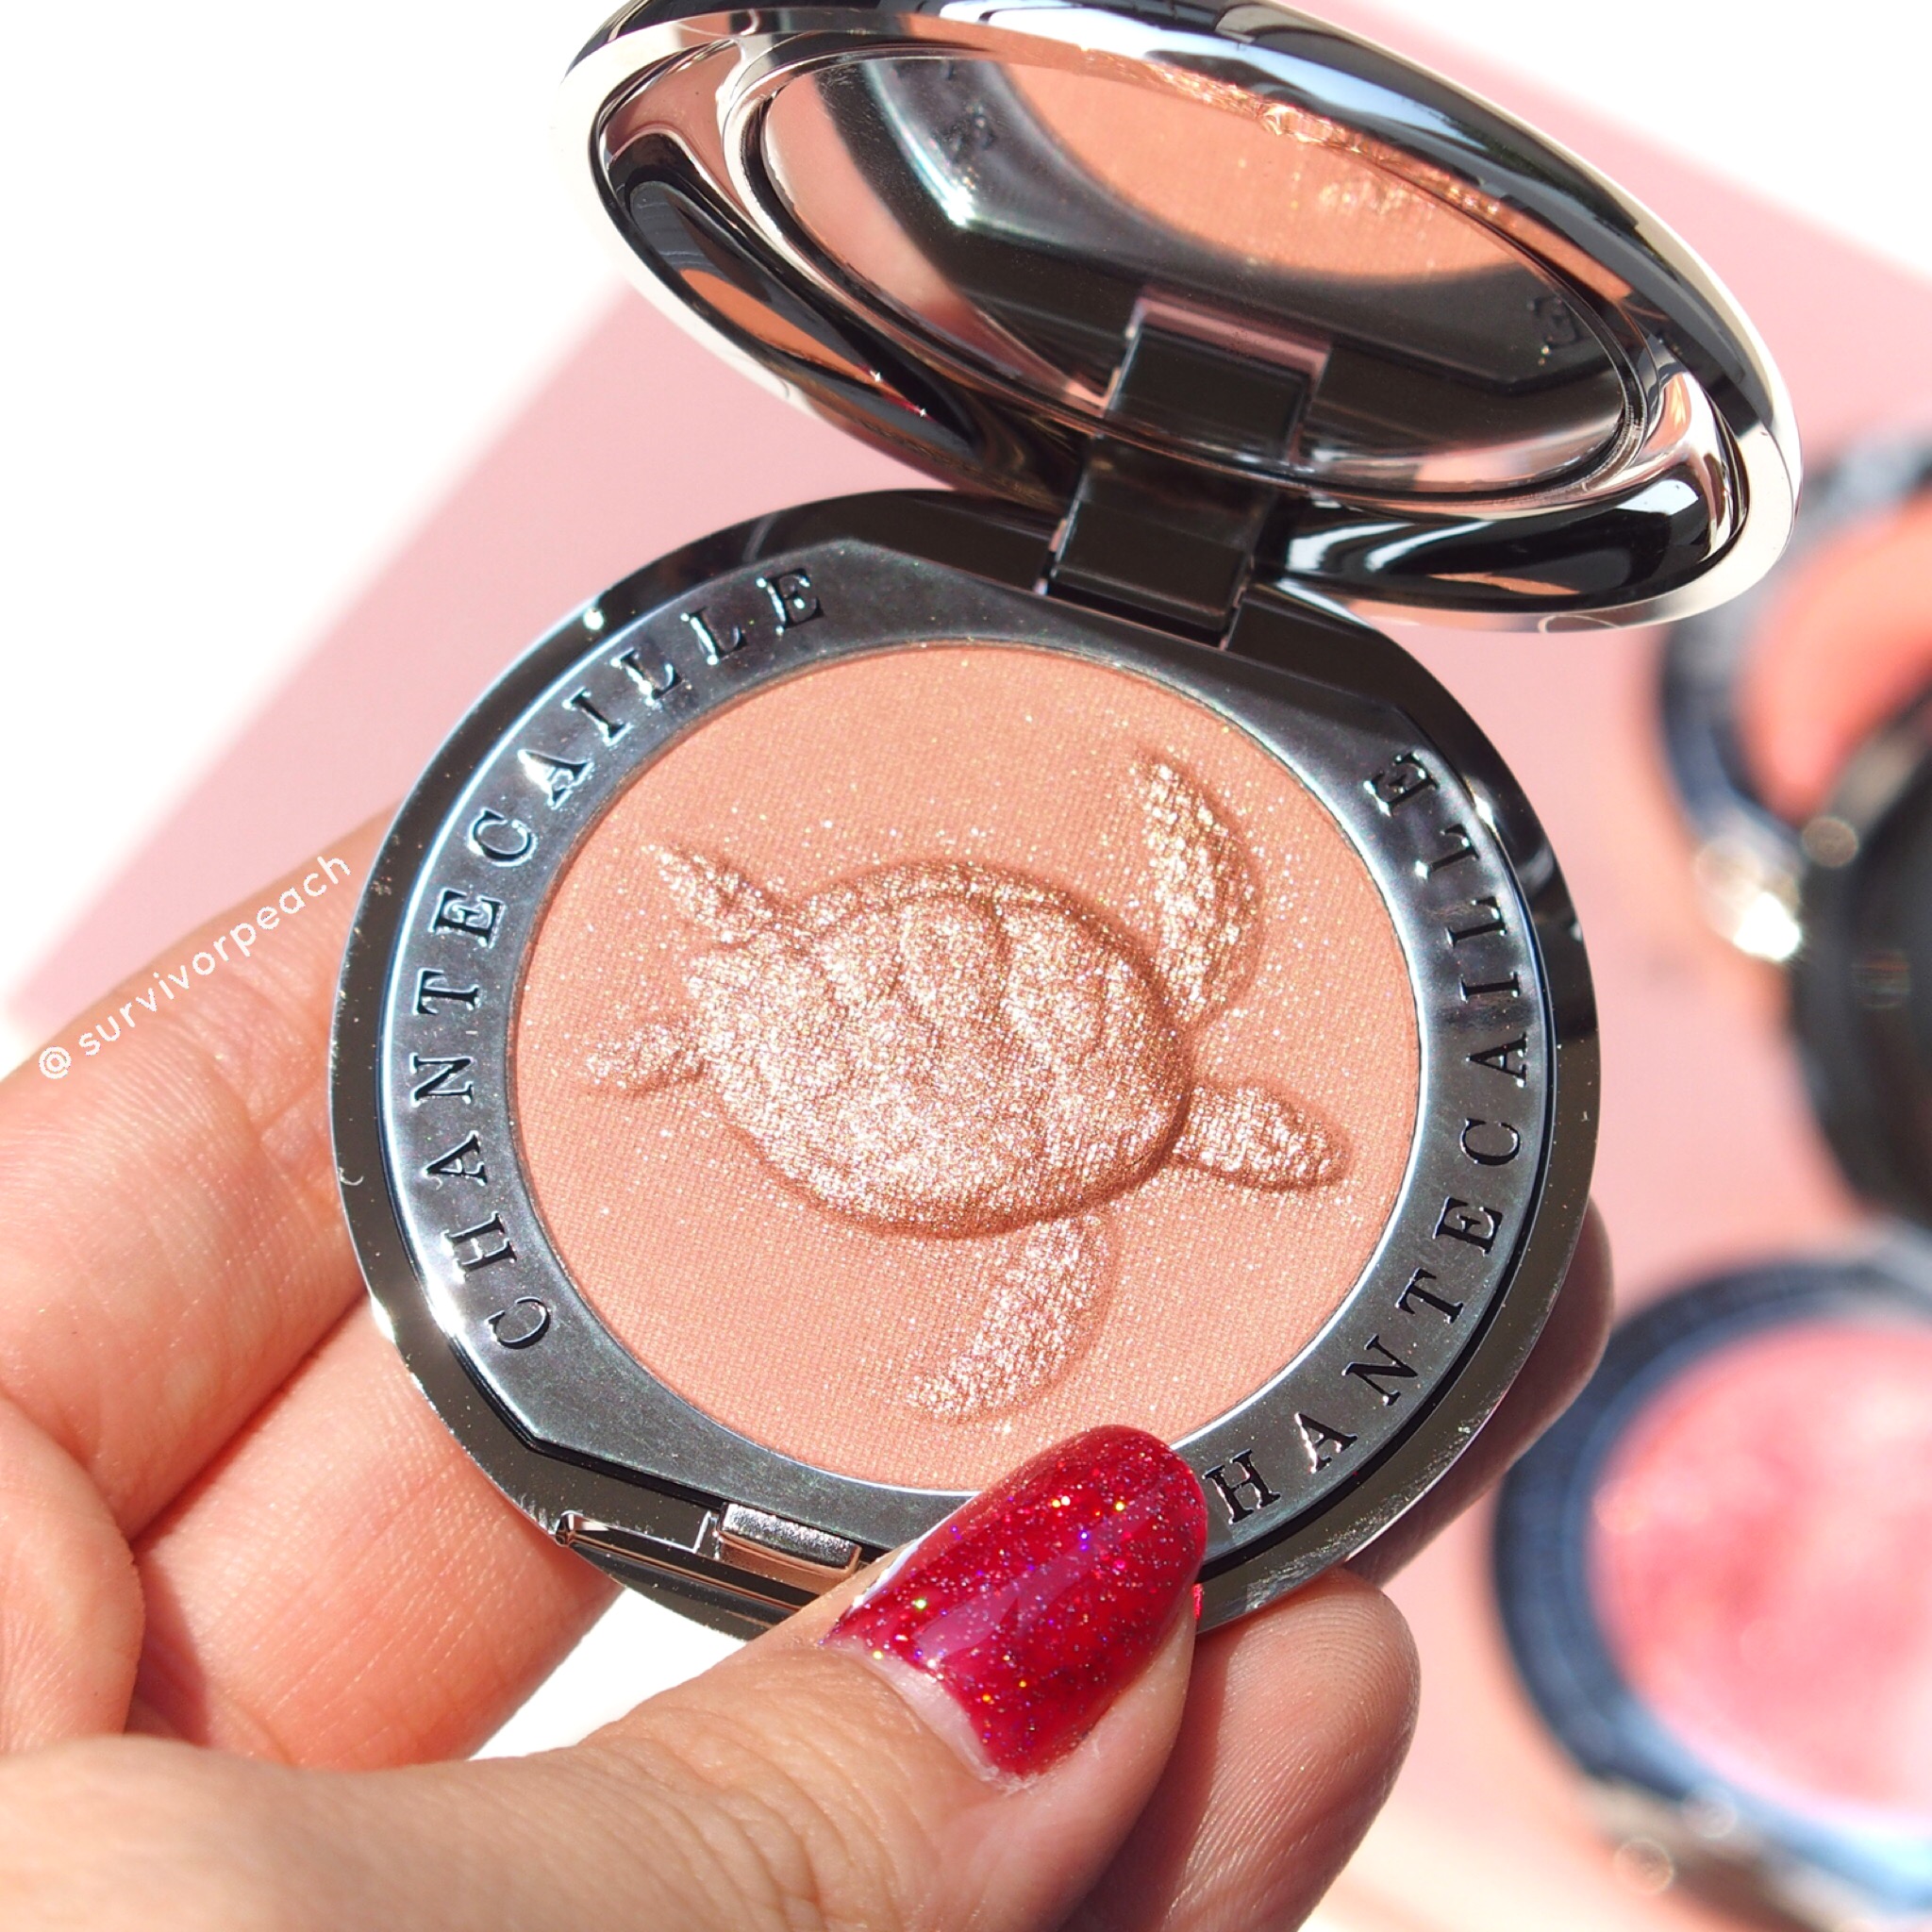 New Chantecaille Blush Cheek shade Emotion with Bee best-selling.